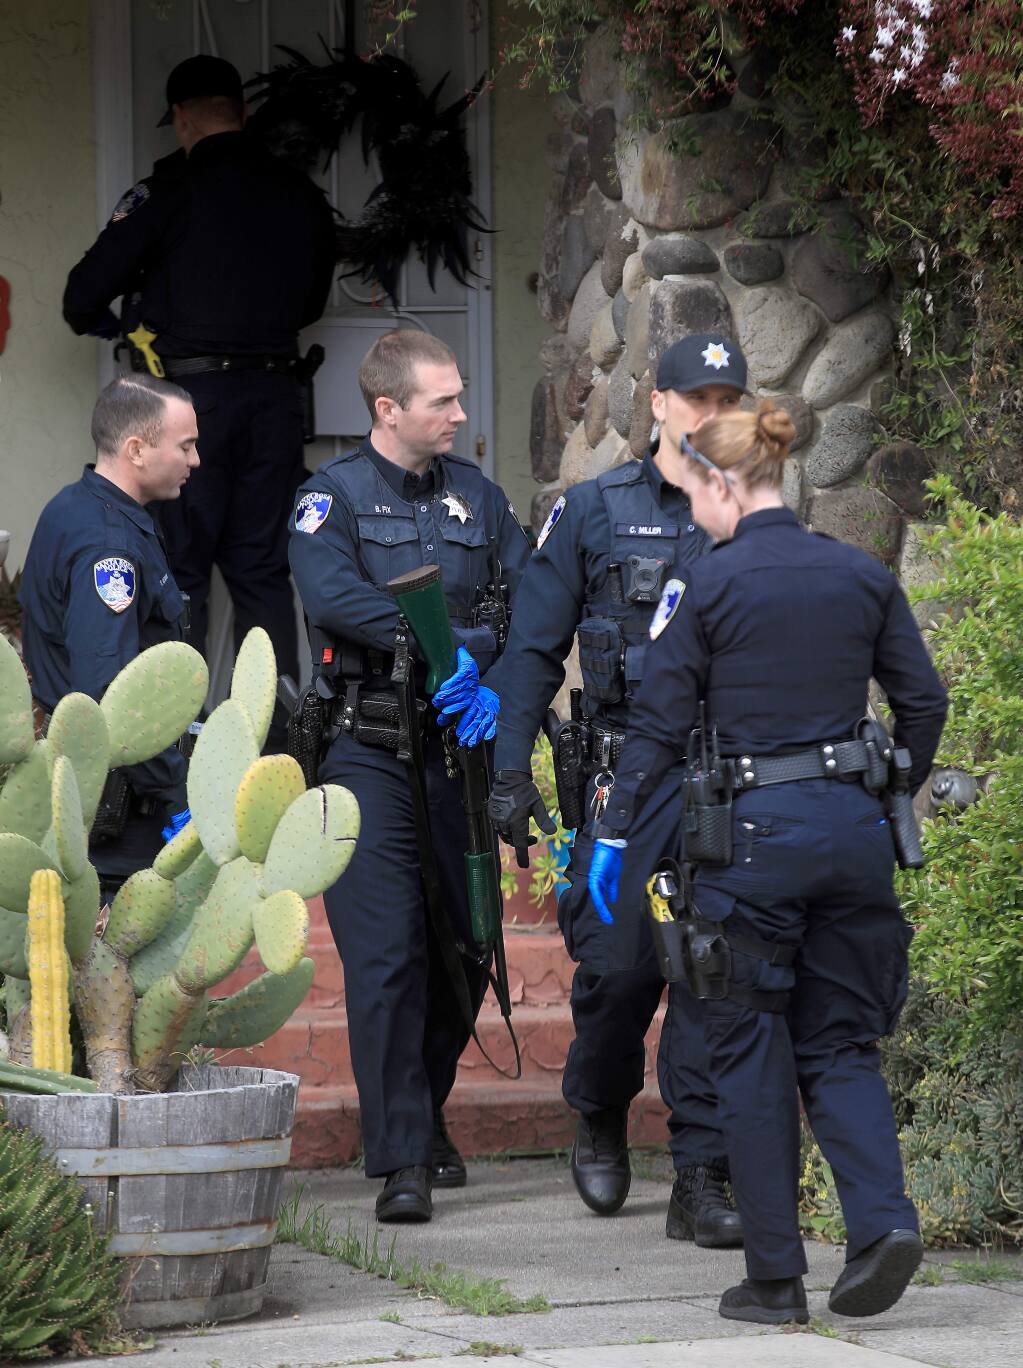 Gloved up to take precautions, Santa Rosa police officers gather after searching a home in Santa Rosa, Tuesday, March 24, 2020. Three officers with the SRPD have tested positive for COVID-19.(Kent Porter / The Press Democrat) 2020